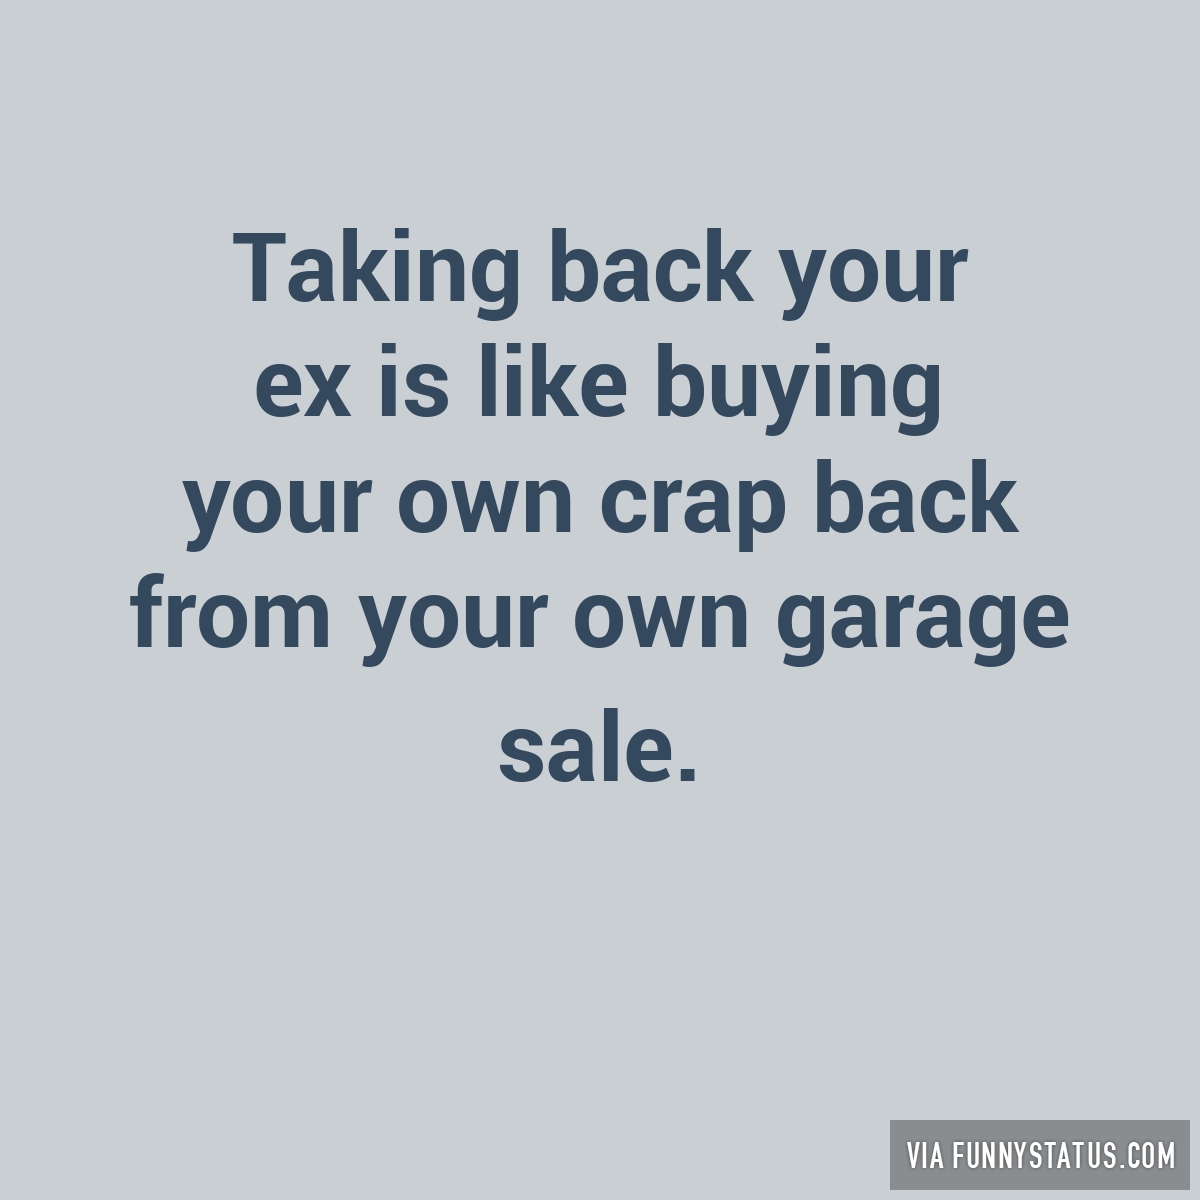 Taking back your ex is like buying your own crap back ...